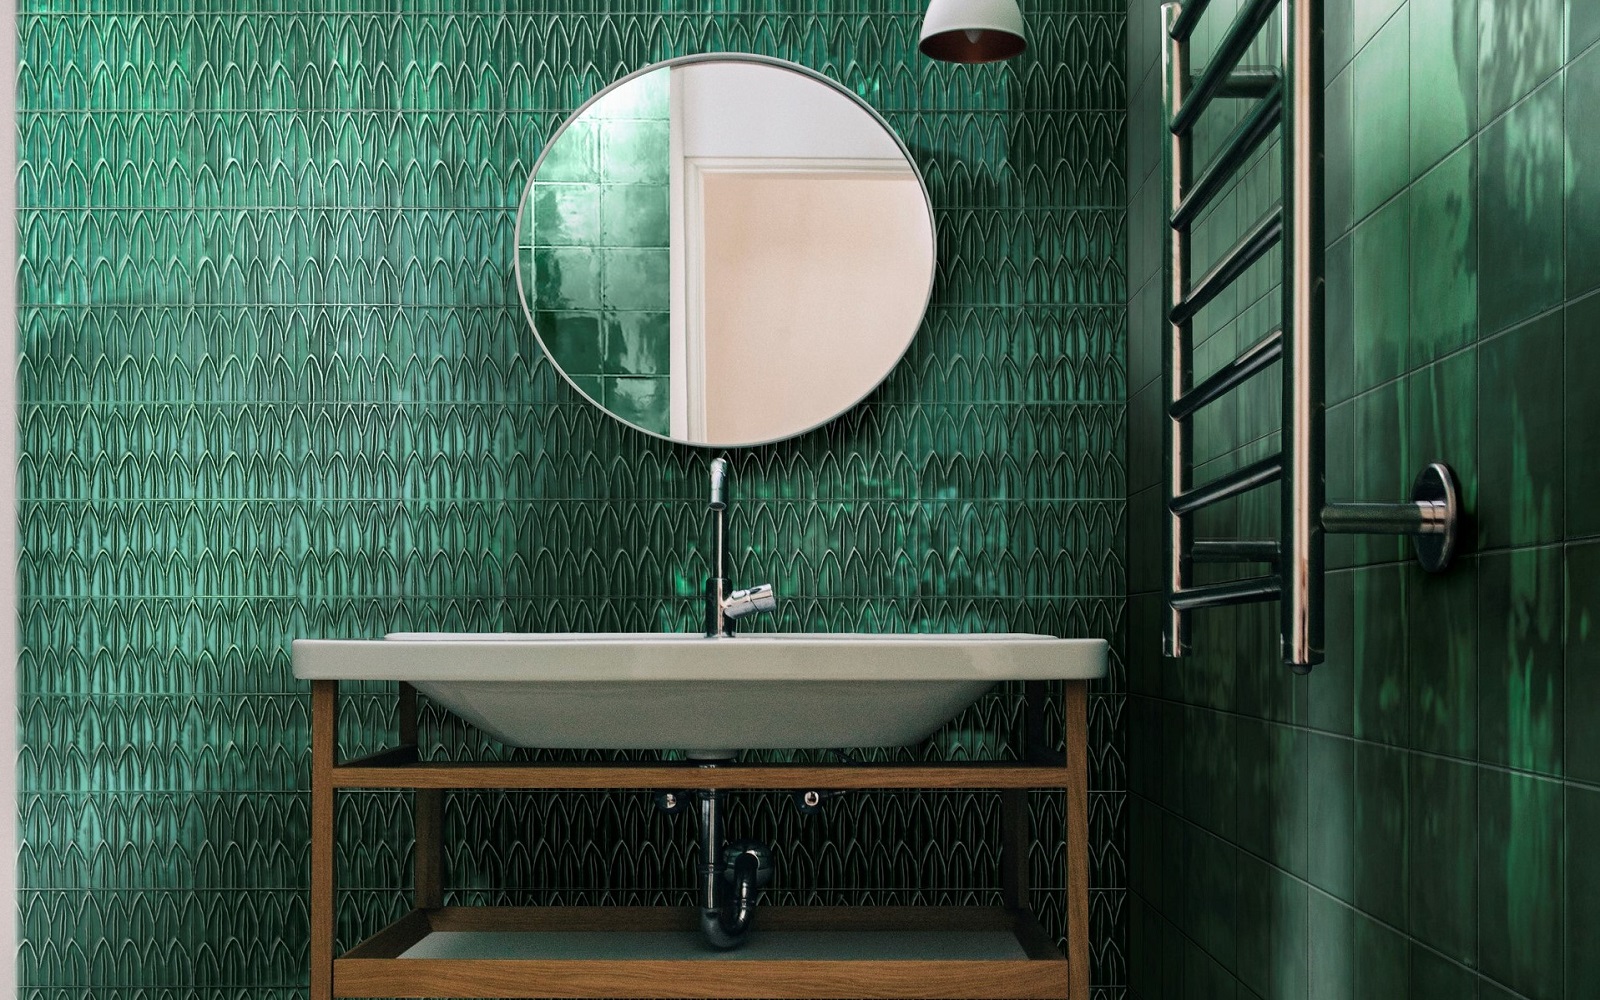 dark green textured tiles in the new CTD Architectural tiles collection